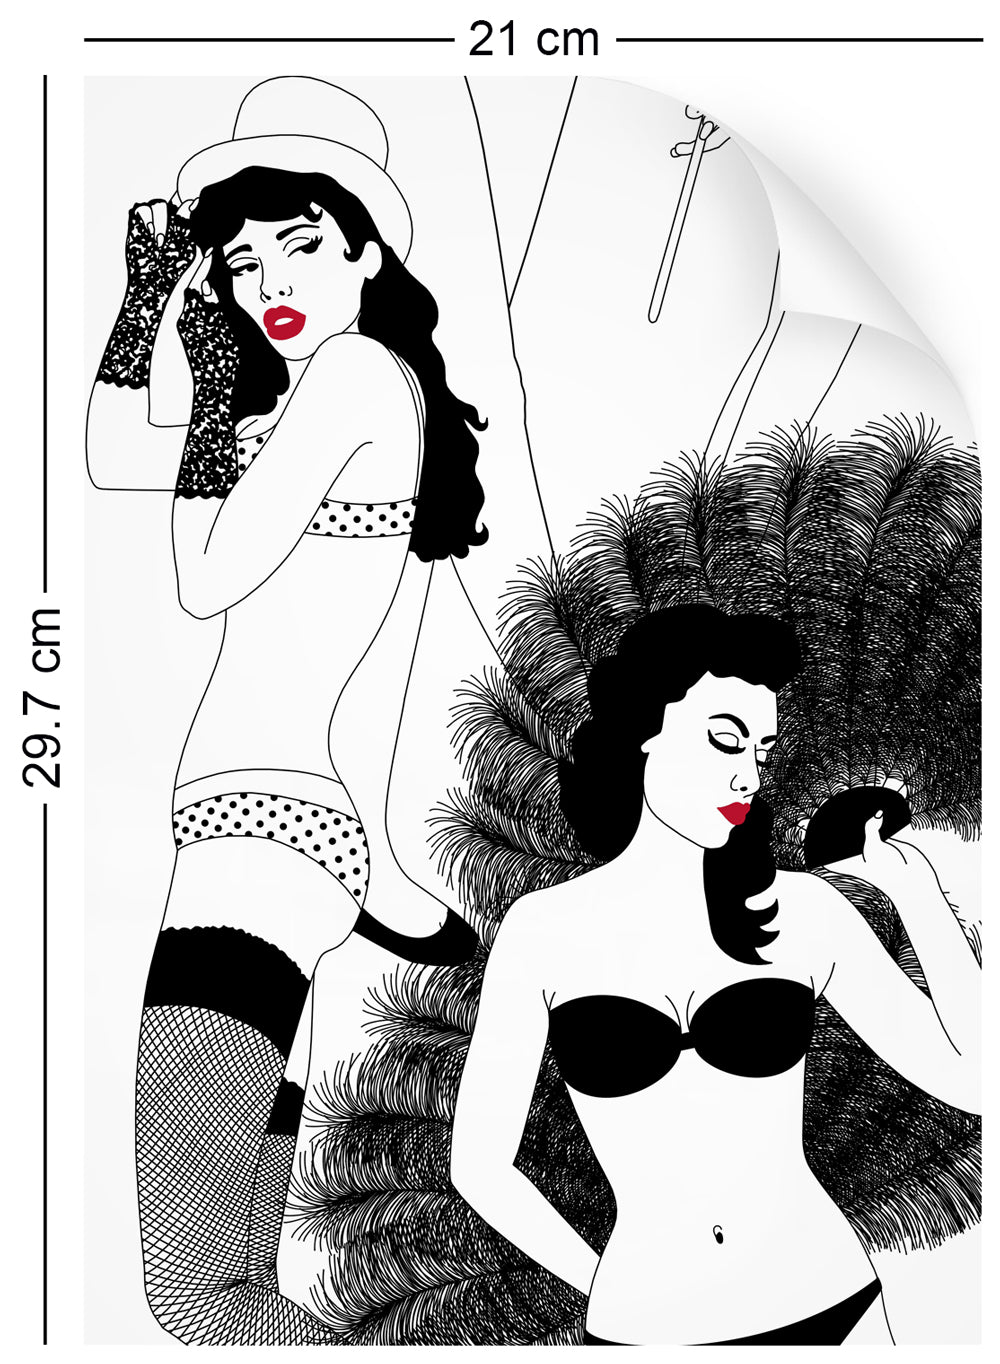 a4 wallpaper swatch with burlesque dancer design in monochrome with red lips